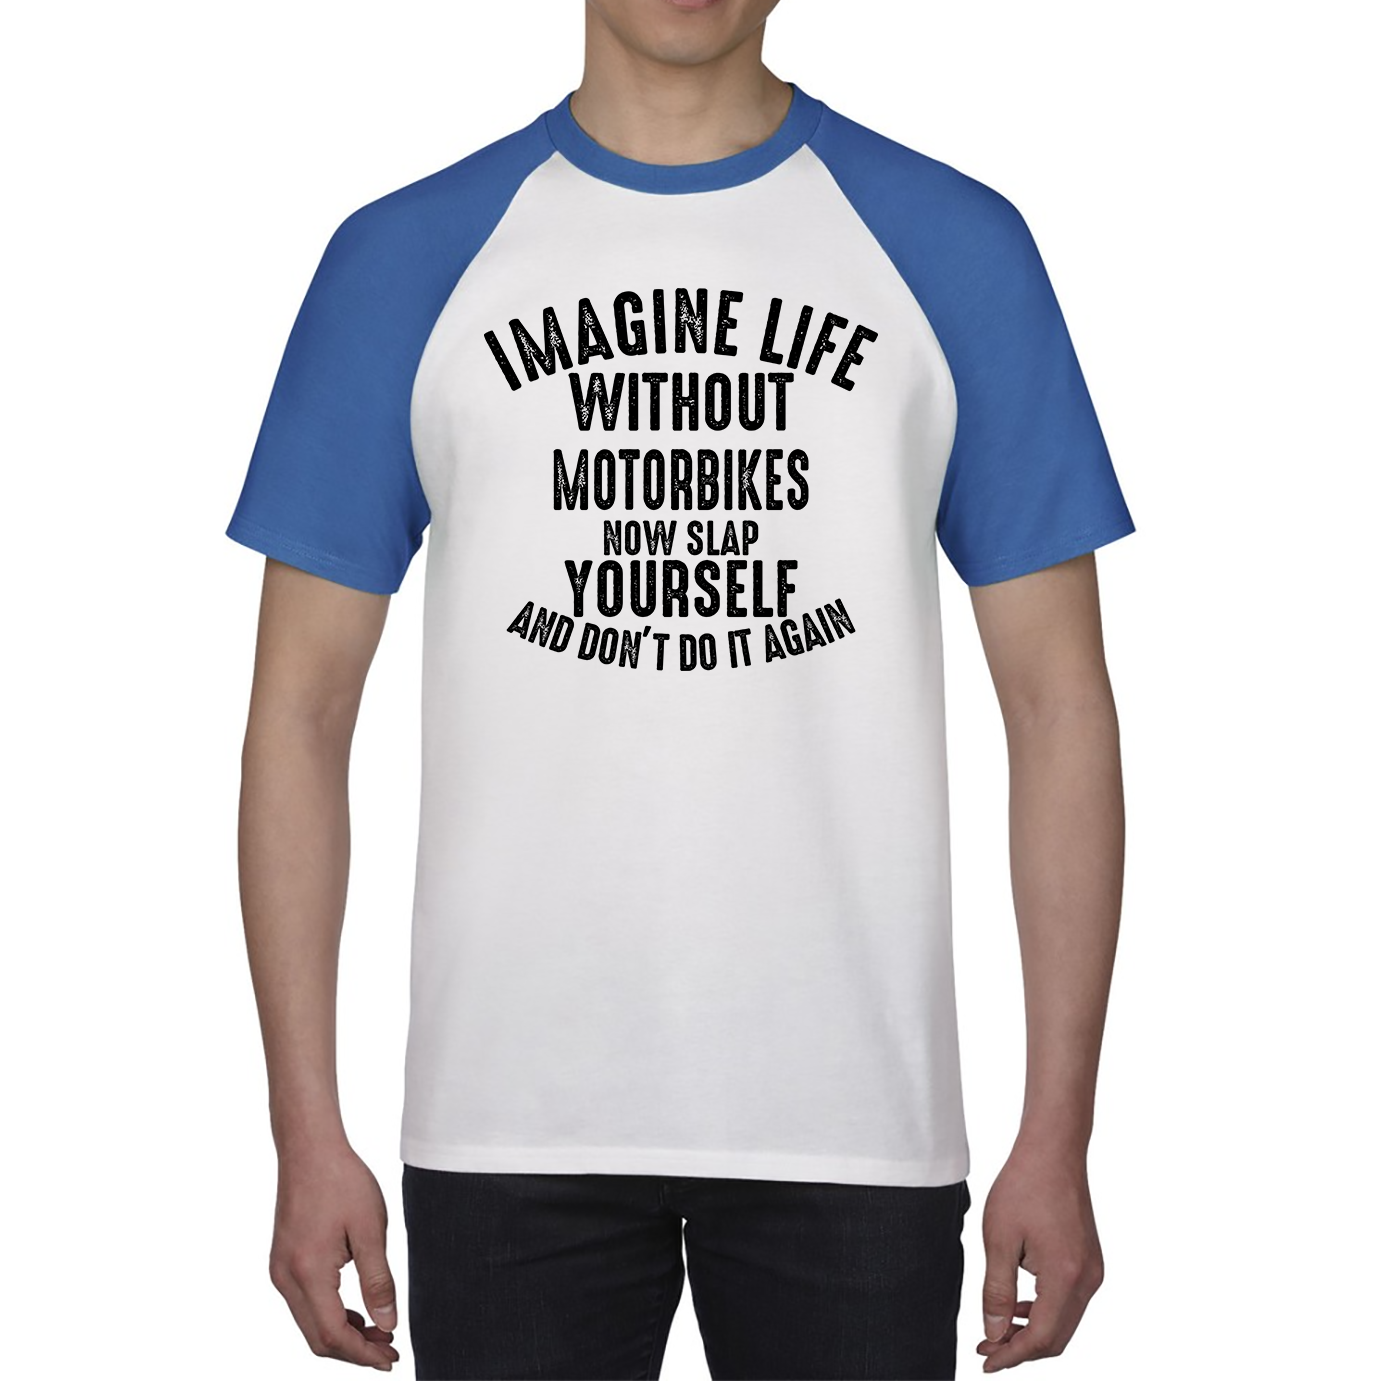 Imagine Life Without Motorbikes Now Slap Yourself And Don' Do It Again Shirt Bike Lovers Racers Riders Funny Joke Baseball T Shirt